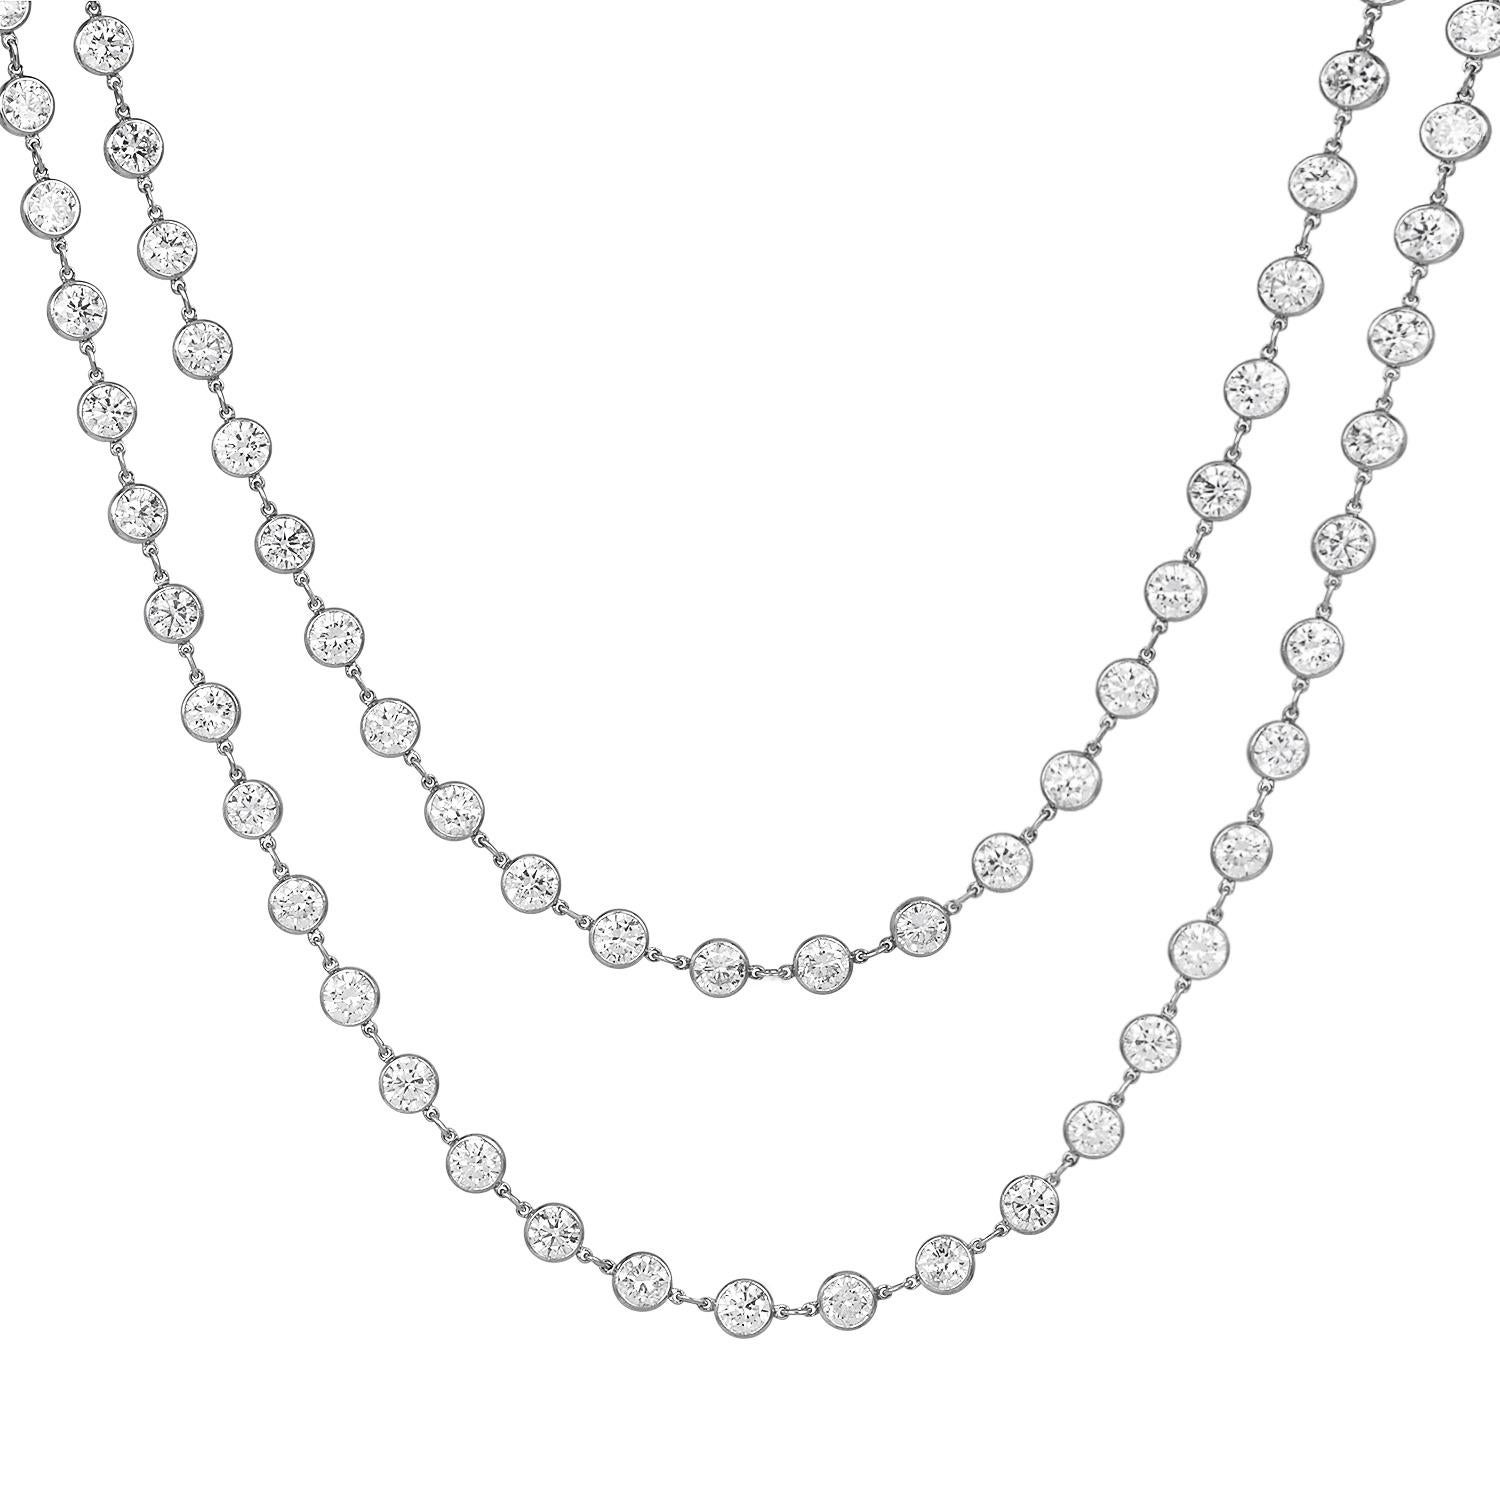 This shimmering and wearable diamond chain necklace is hand-crafted in solid platinum.

Weighing 32.5 grams and measuring 40” long. Exposing bezel-set, with approx. 120 high-quality round-cut diamonds, bezel-set, weighing approximately,